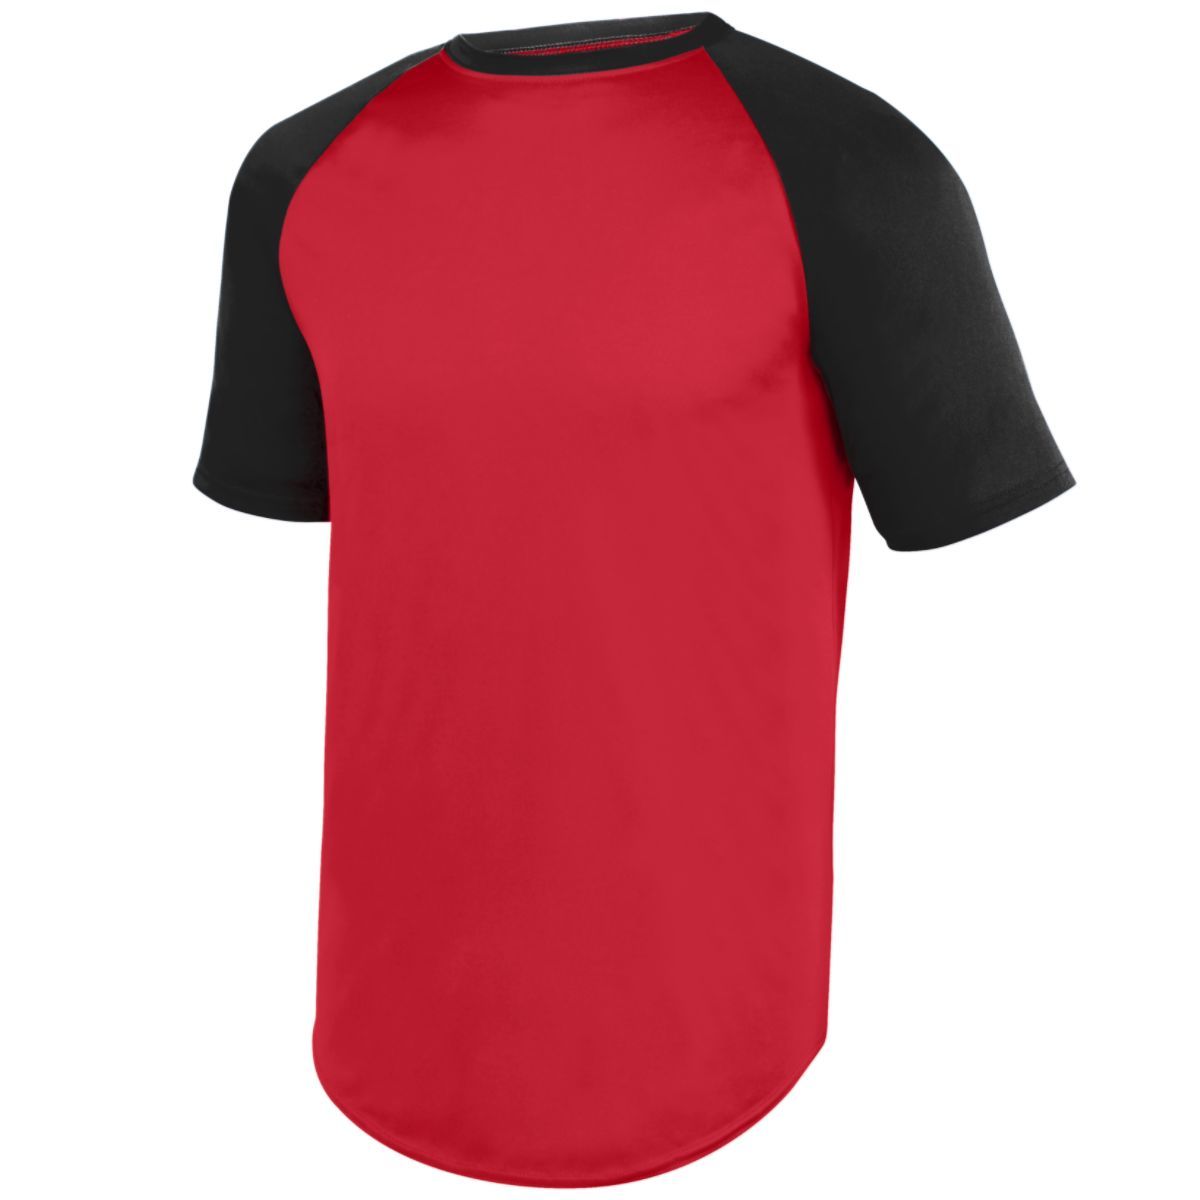 Augusta Sportswear Youth Wicking Short Sleeve Baseball Jersey in Red/Black  -Part of the Youth, Youth-Jersey, Augusta-Products, Baseball, Shirts, All-Sports, All-Sports-1 product lines at KanaleyCreations.com